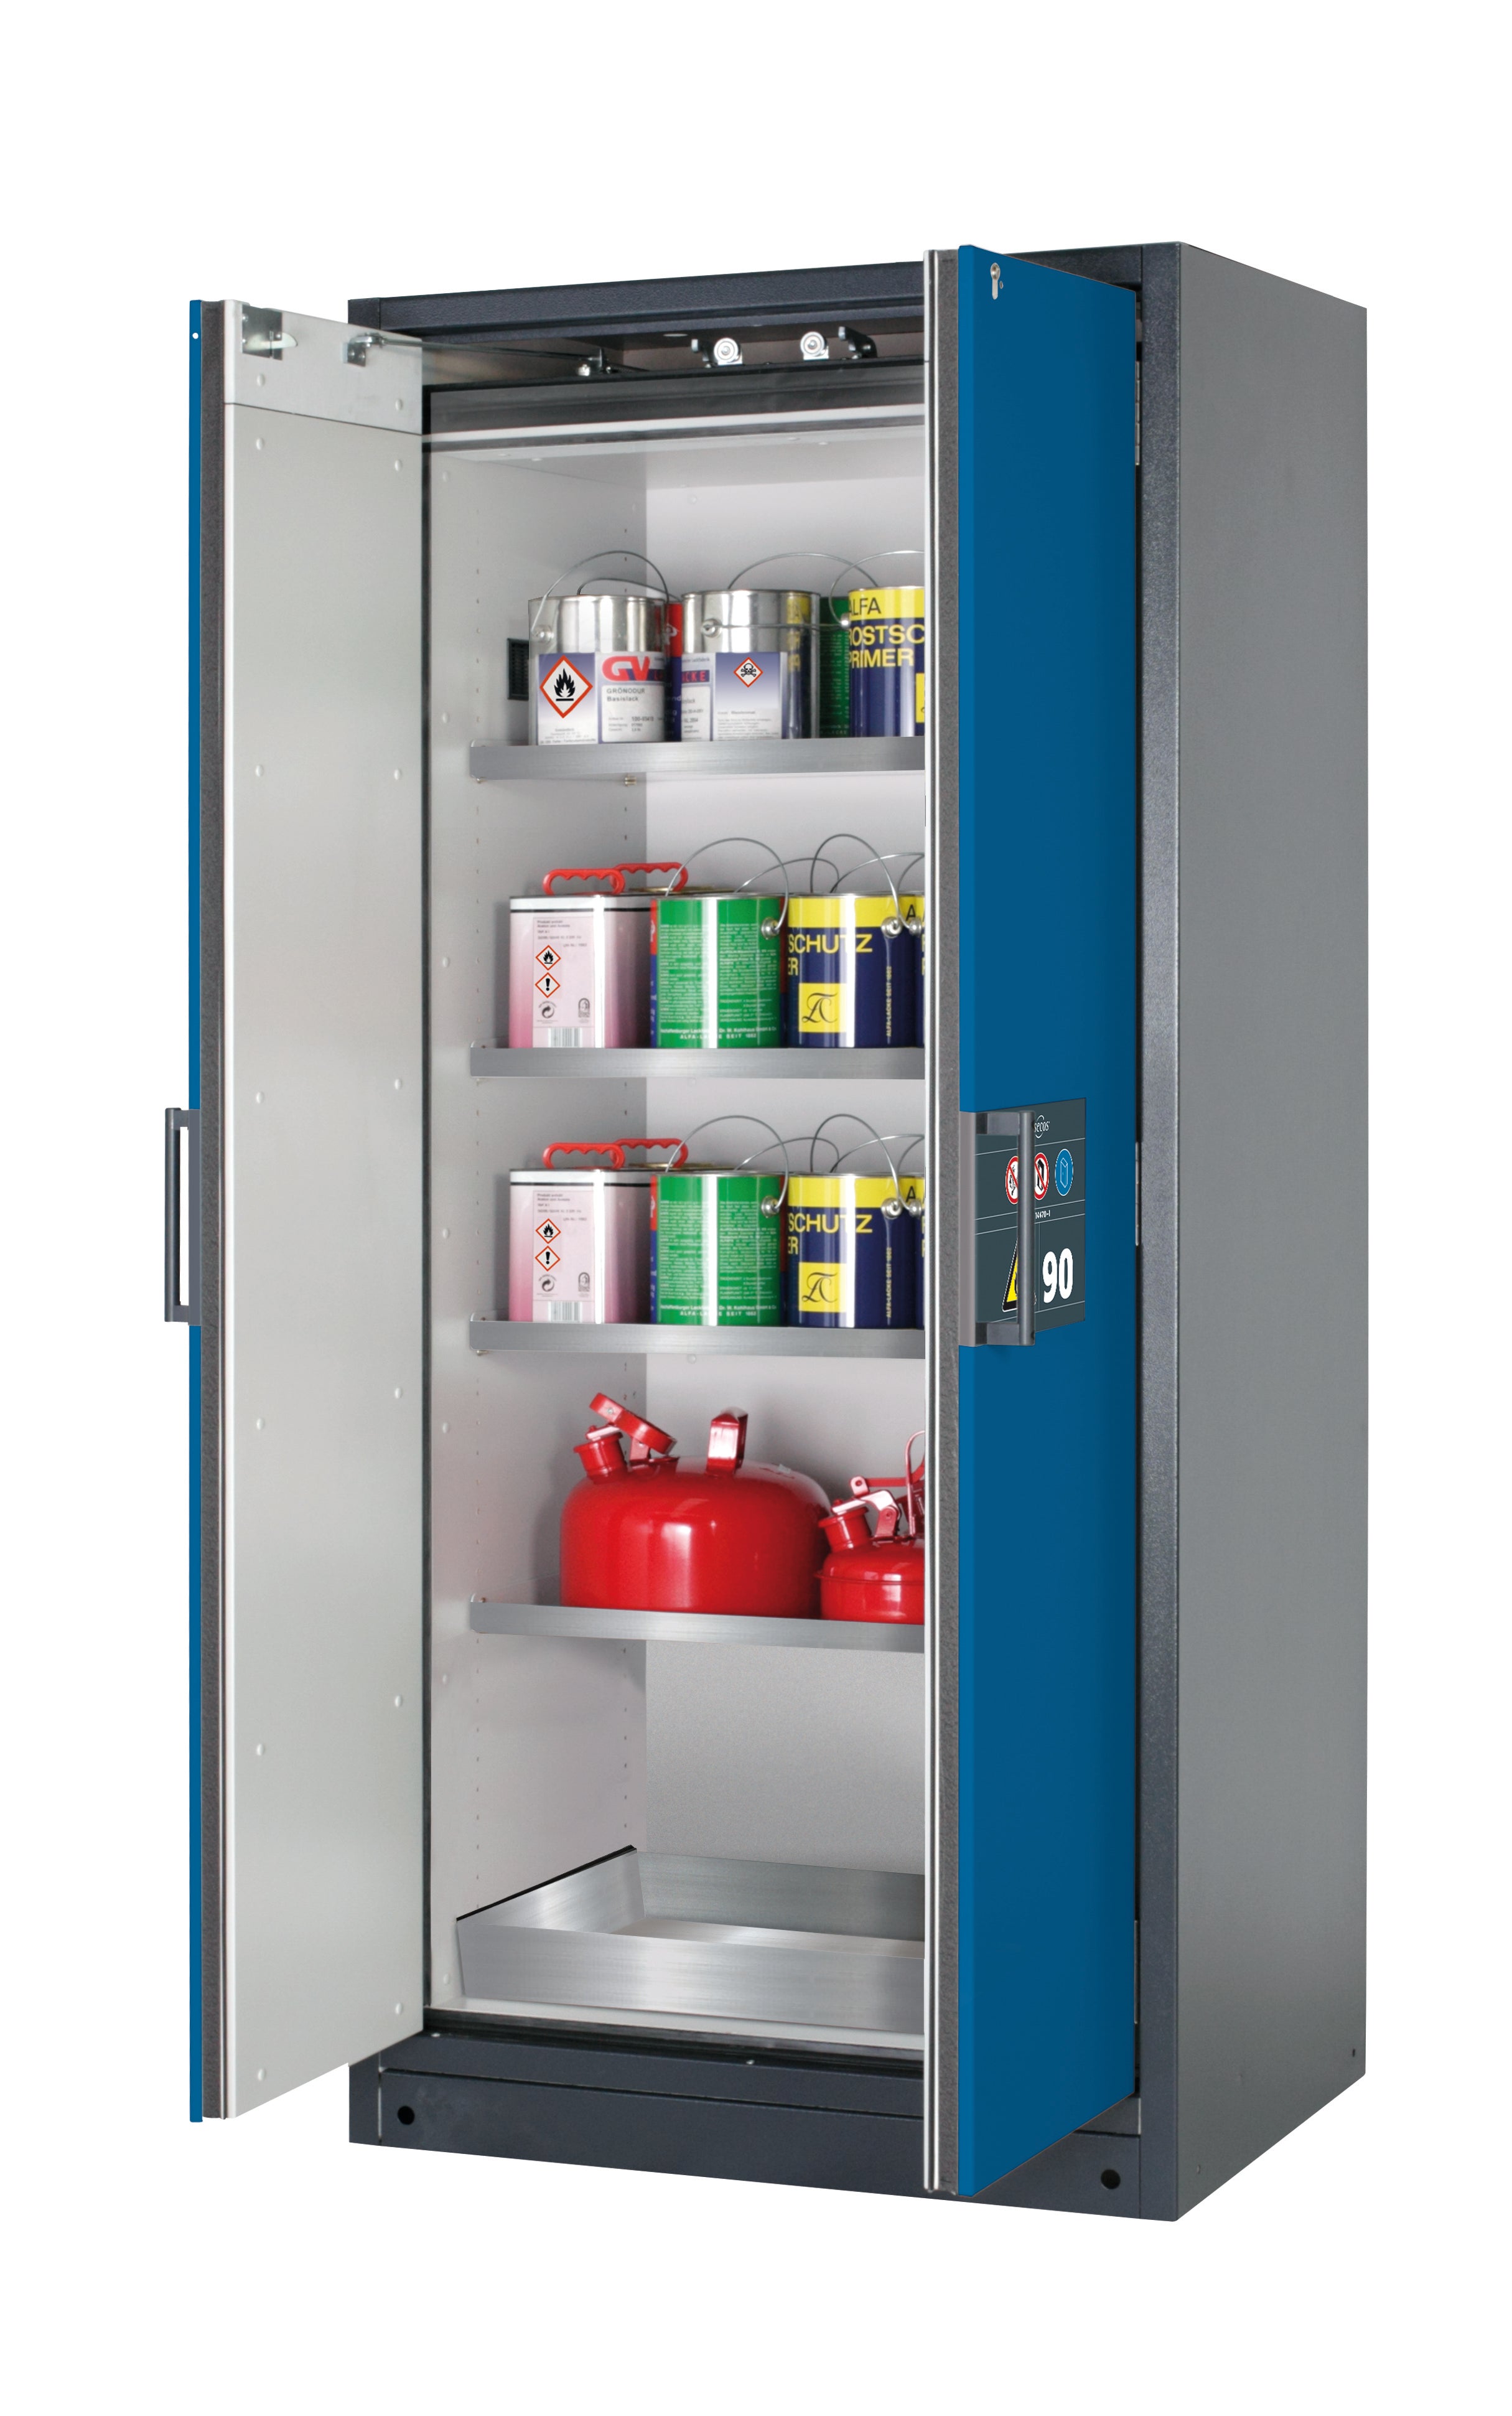 Type 90 safety storage cabinet Q-CLASSIC-90 model Q90.195.090 in gentian blue RAL 5010 with 4x shelf standard (stainless steel 1.4301),